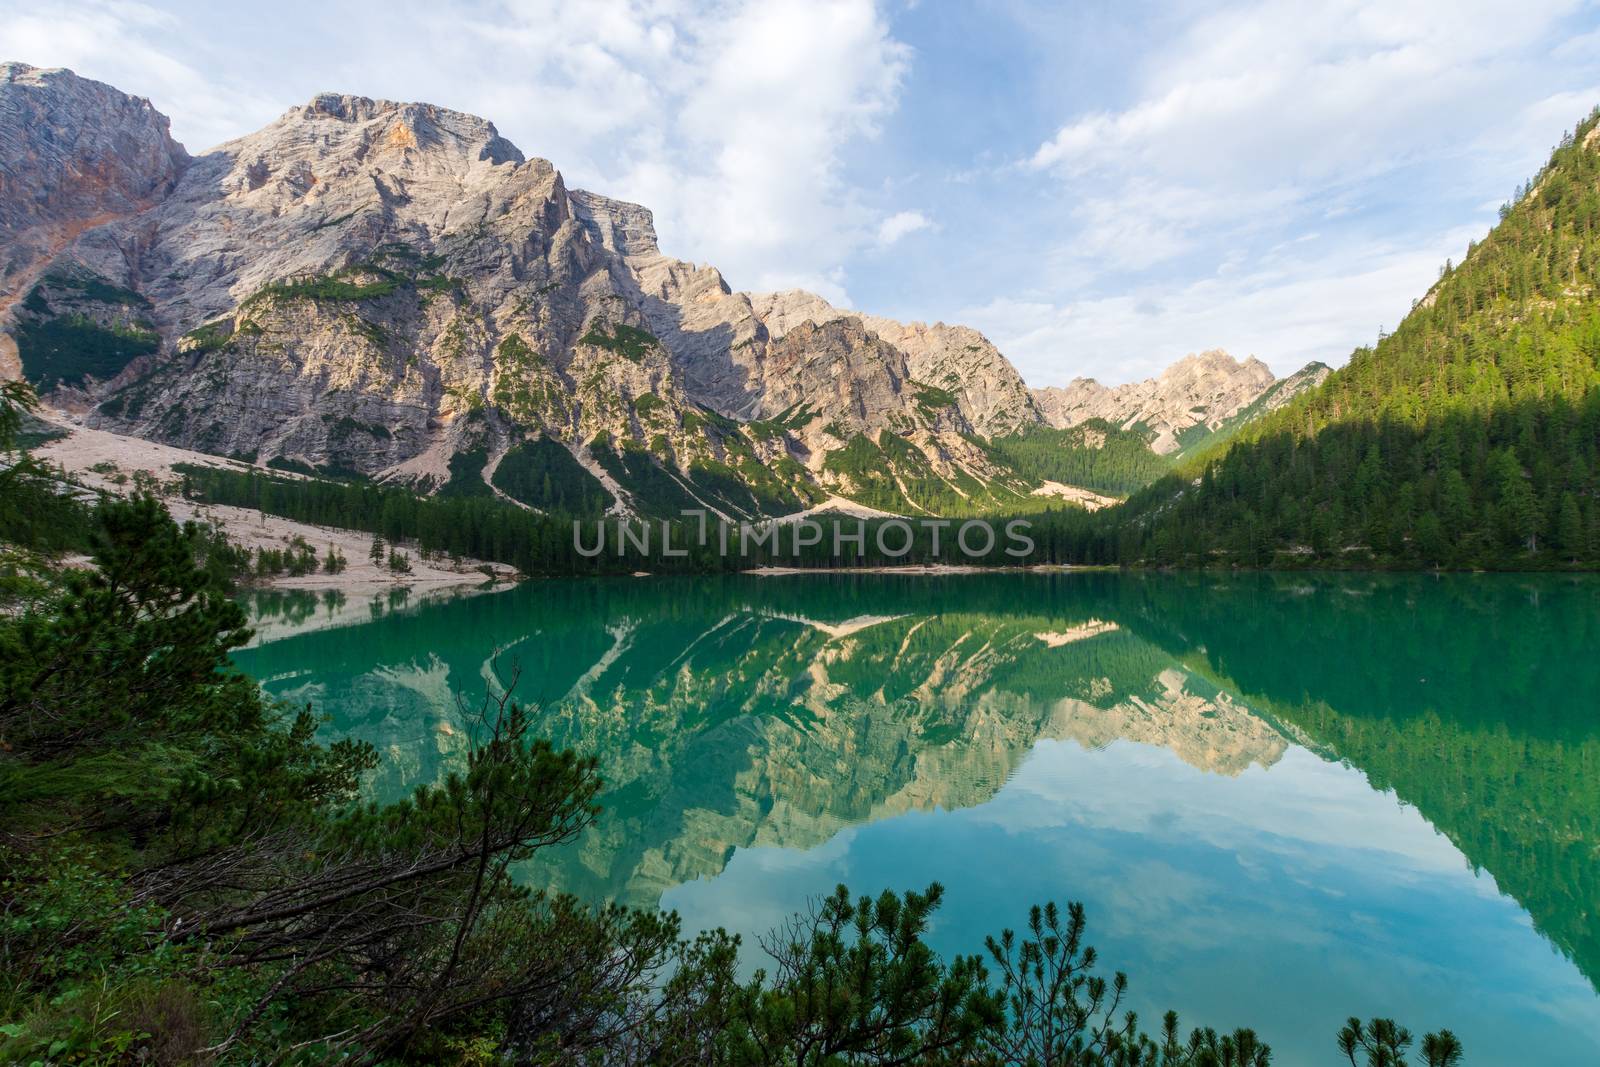 View of Lake Braies under a blue sky with white clouds, in the background the Seekofel or Croda del Becco